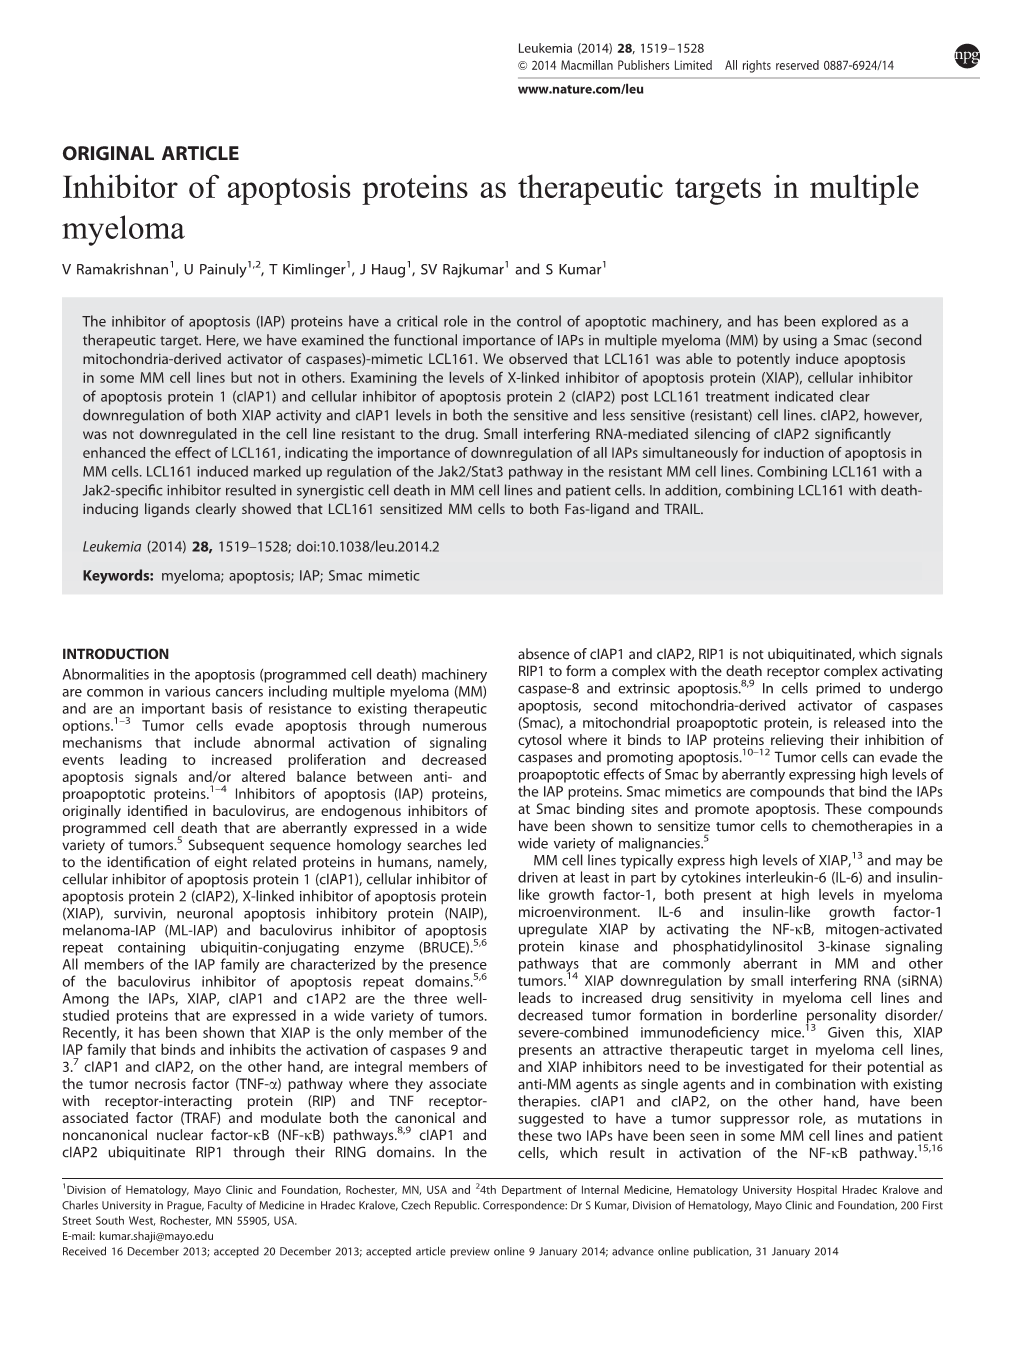 Inhibitor of Apoptosis Proteins As Therapeutic Targets in Multiple Myeloma